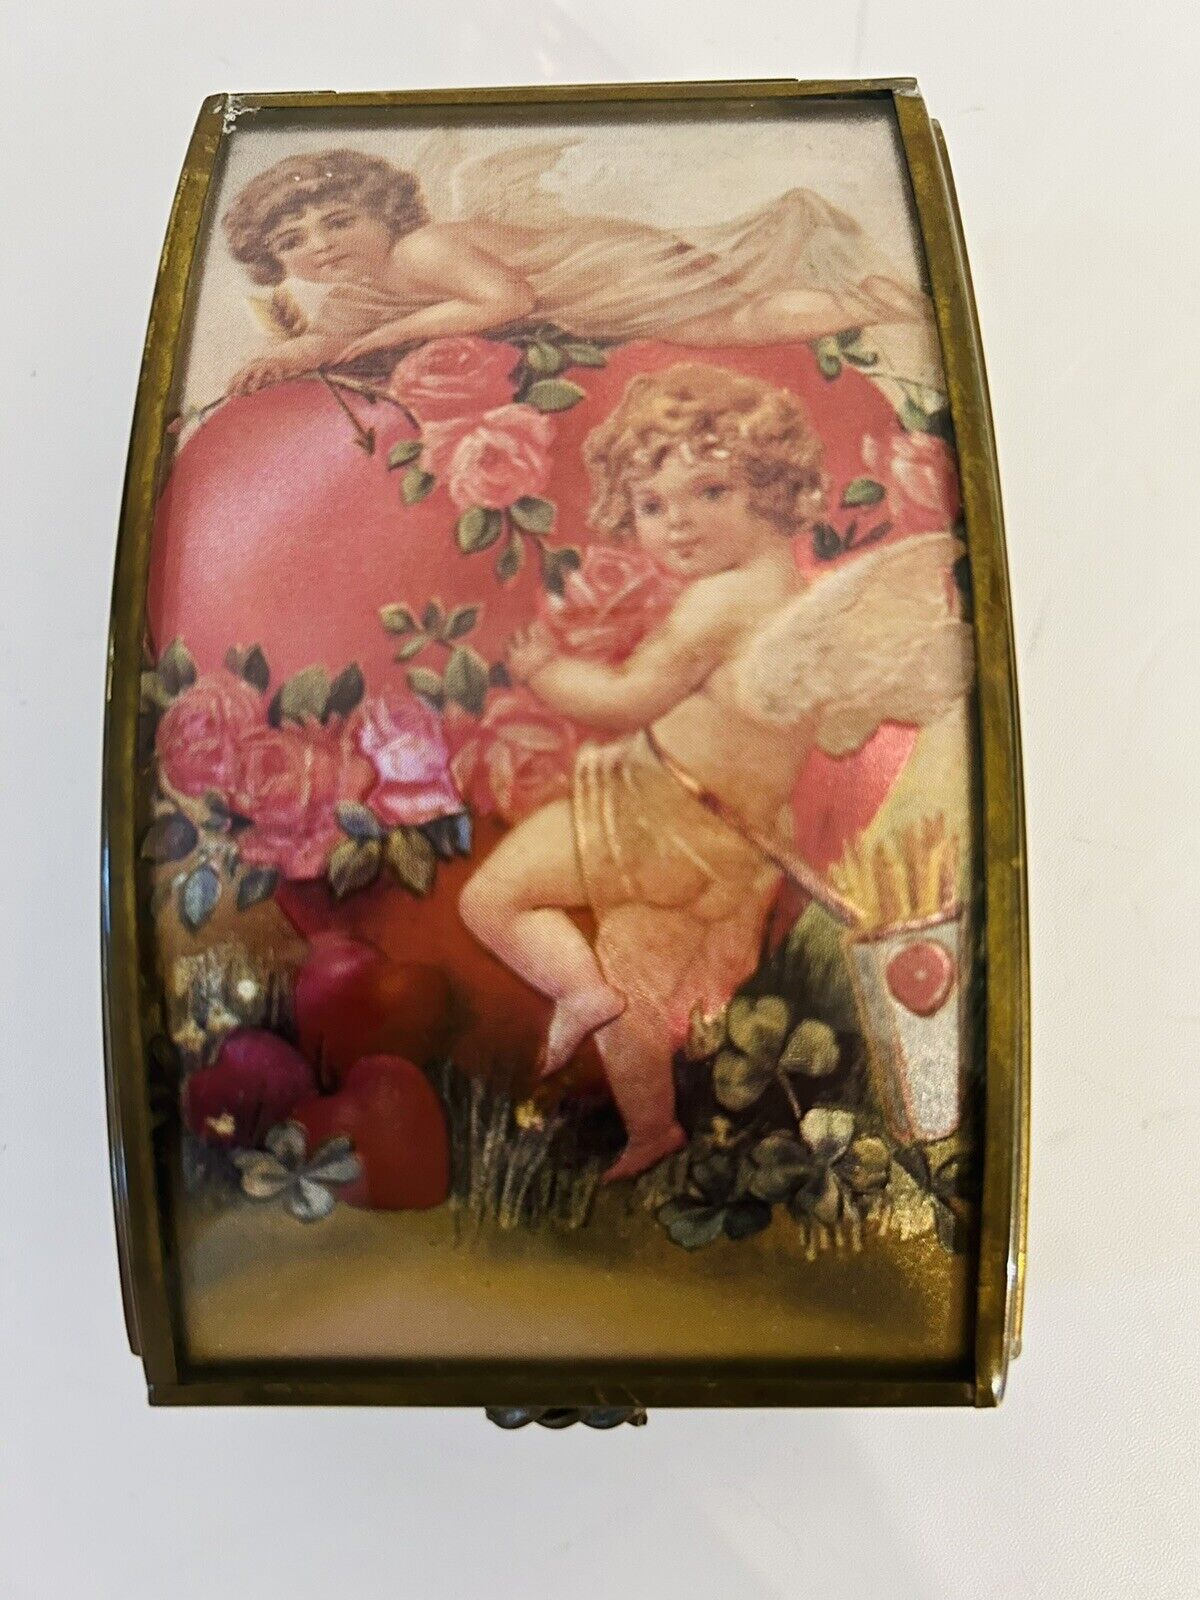 Vintage Brass Music Box W/Angels, Roses, & Hearts-Plays “All I Ask Of You”